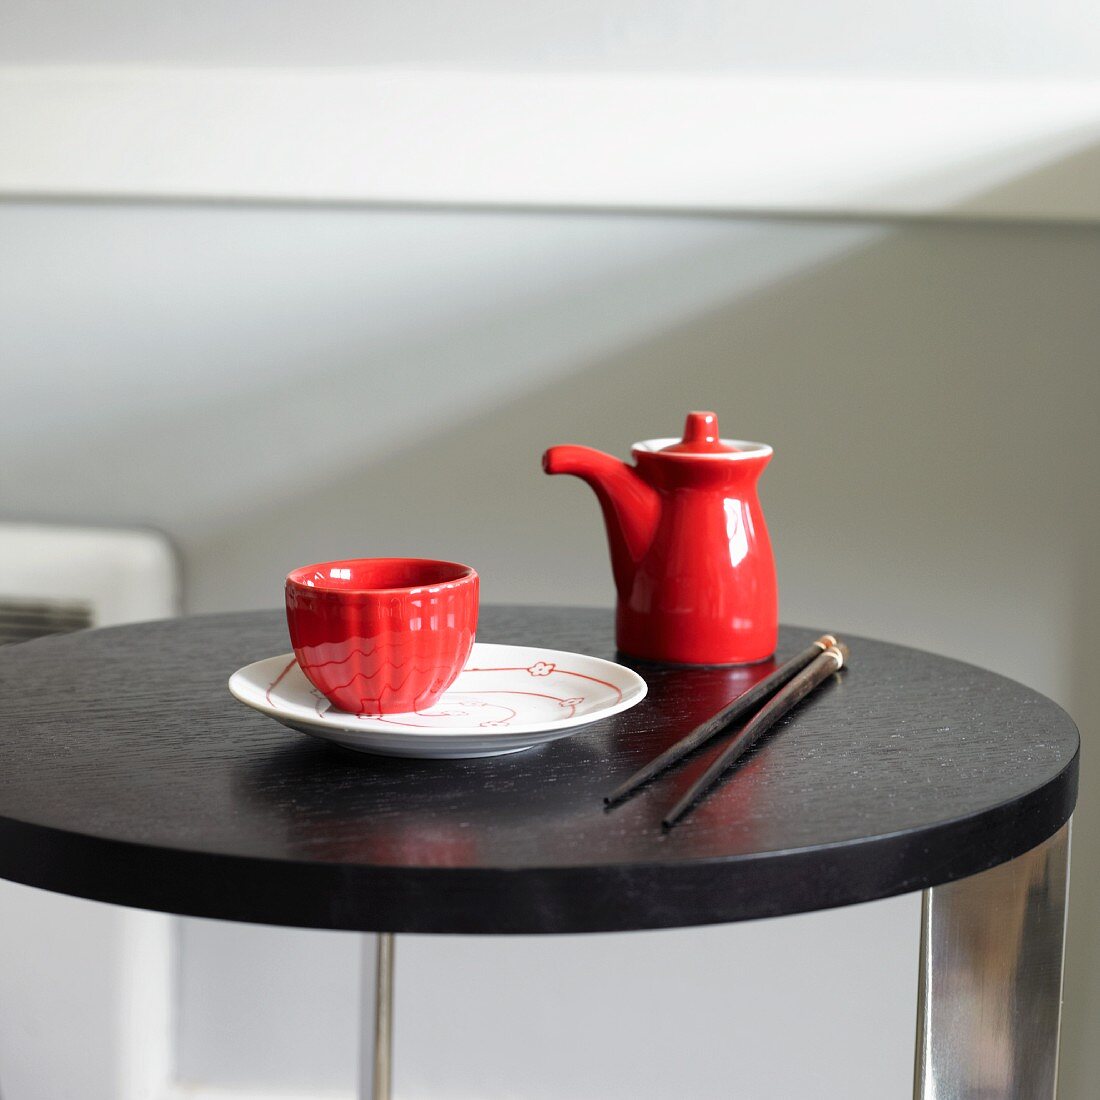 Red and White Asian Dishware on a Table with Chopsticks